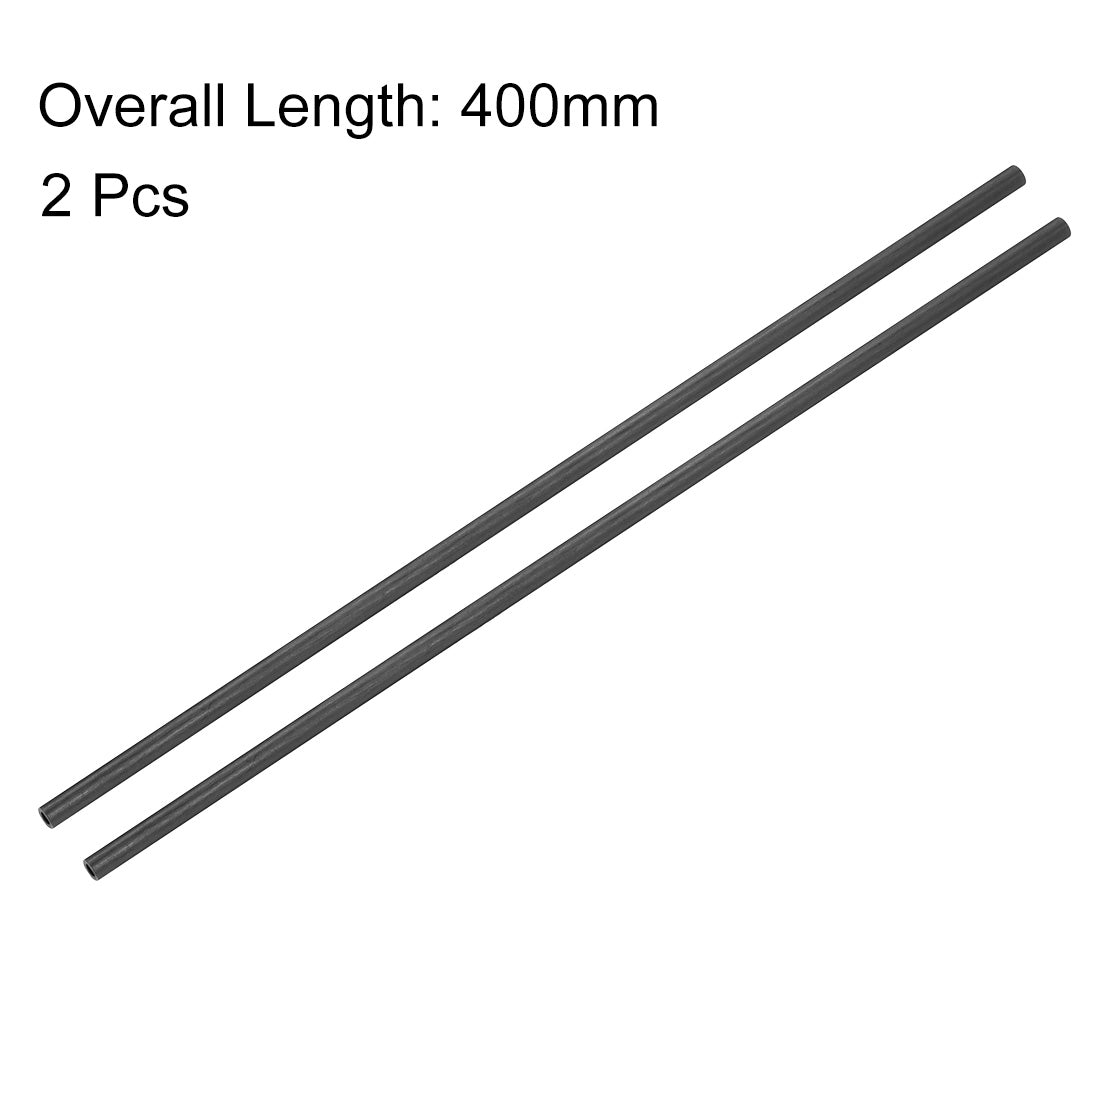 uxcell Uxcell Carbon Fiber Round Tube 4mm x 3mm x 400mm Carbon Fiber Wing Pultrusion Tubing for RC Airplane Quadcopter 2 Pcs